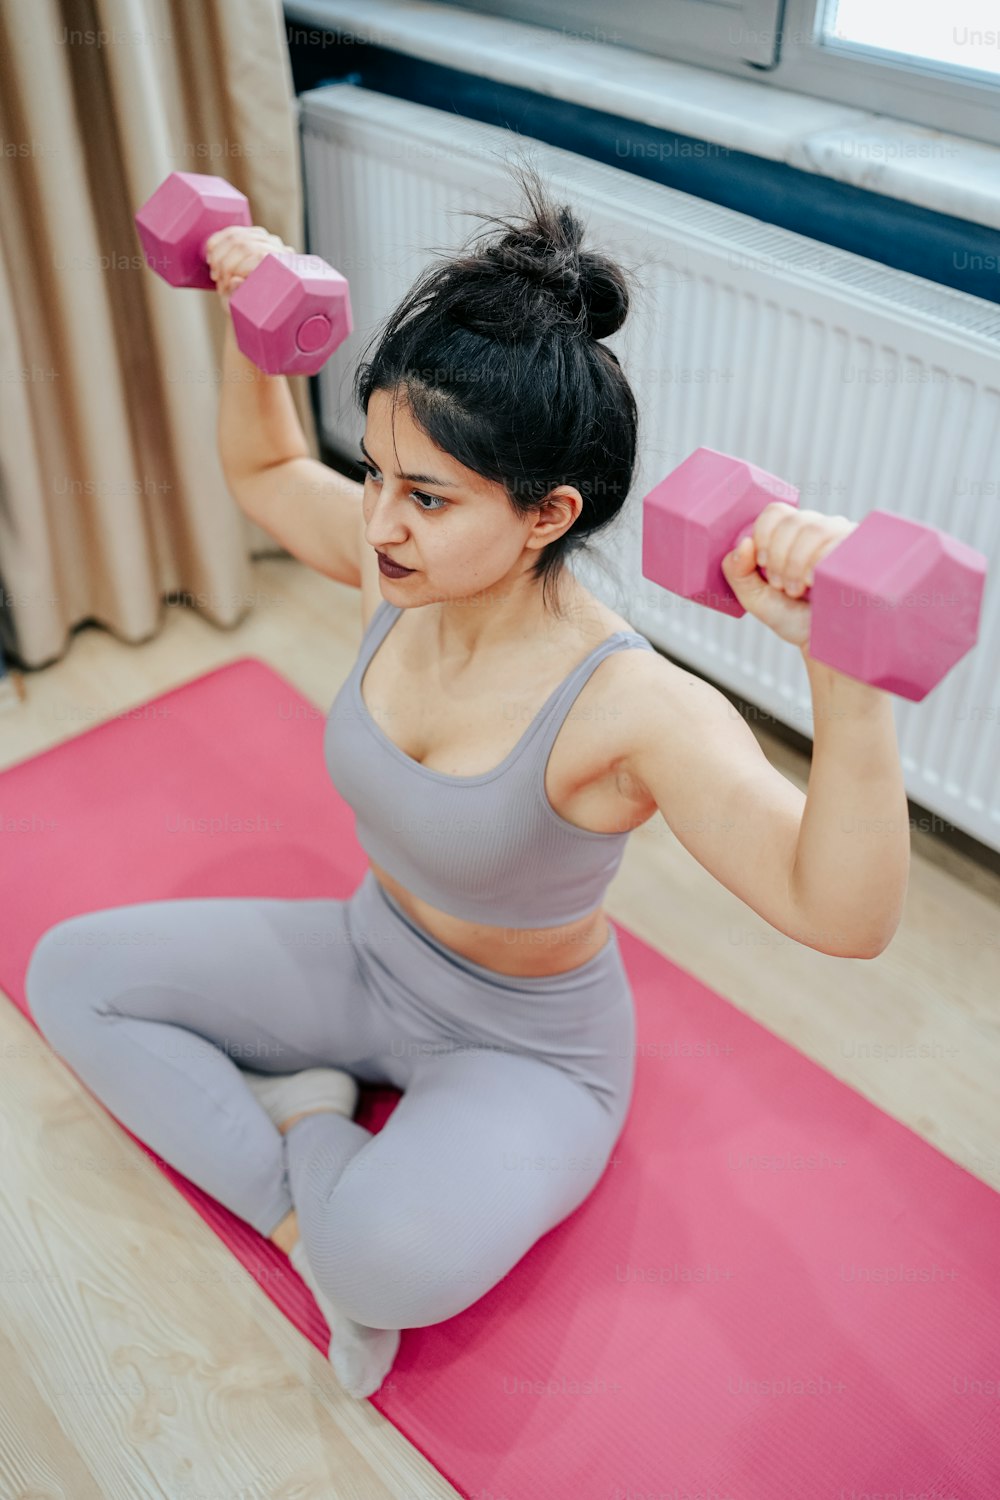 a woman is doing exercises with pink dumbbells